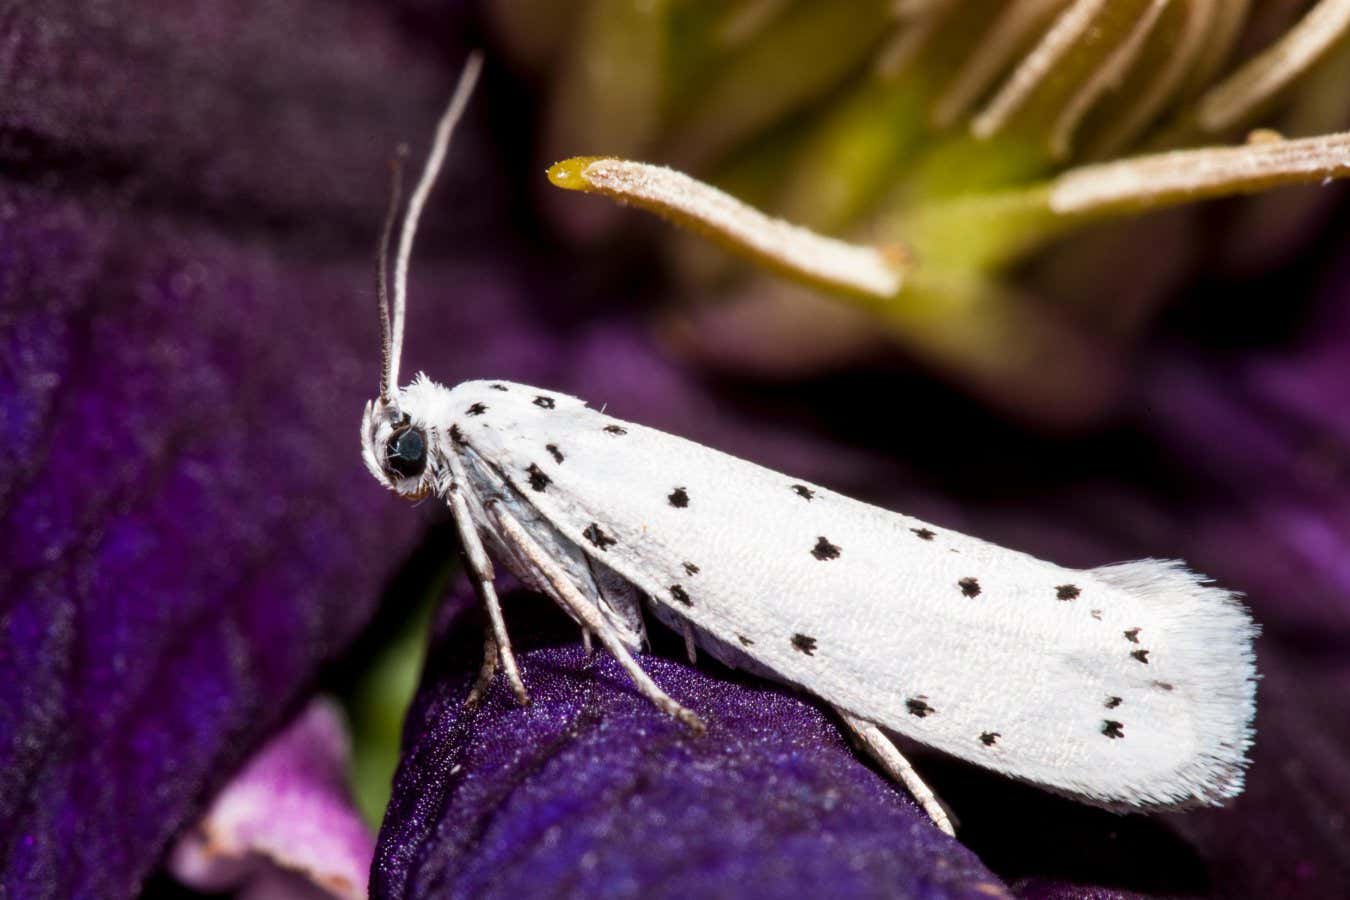 City moths may have evolved smaller wings due to light pollution